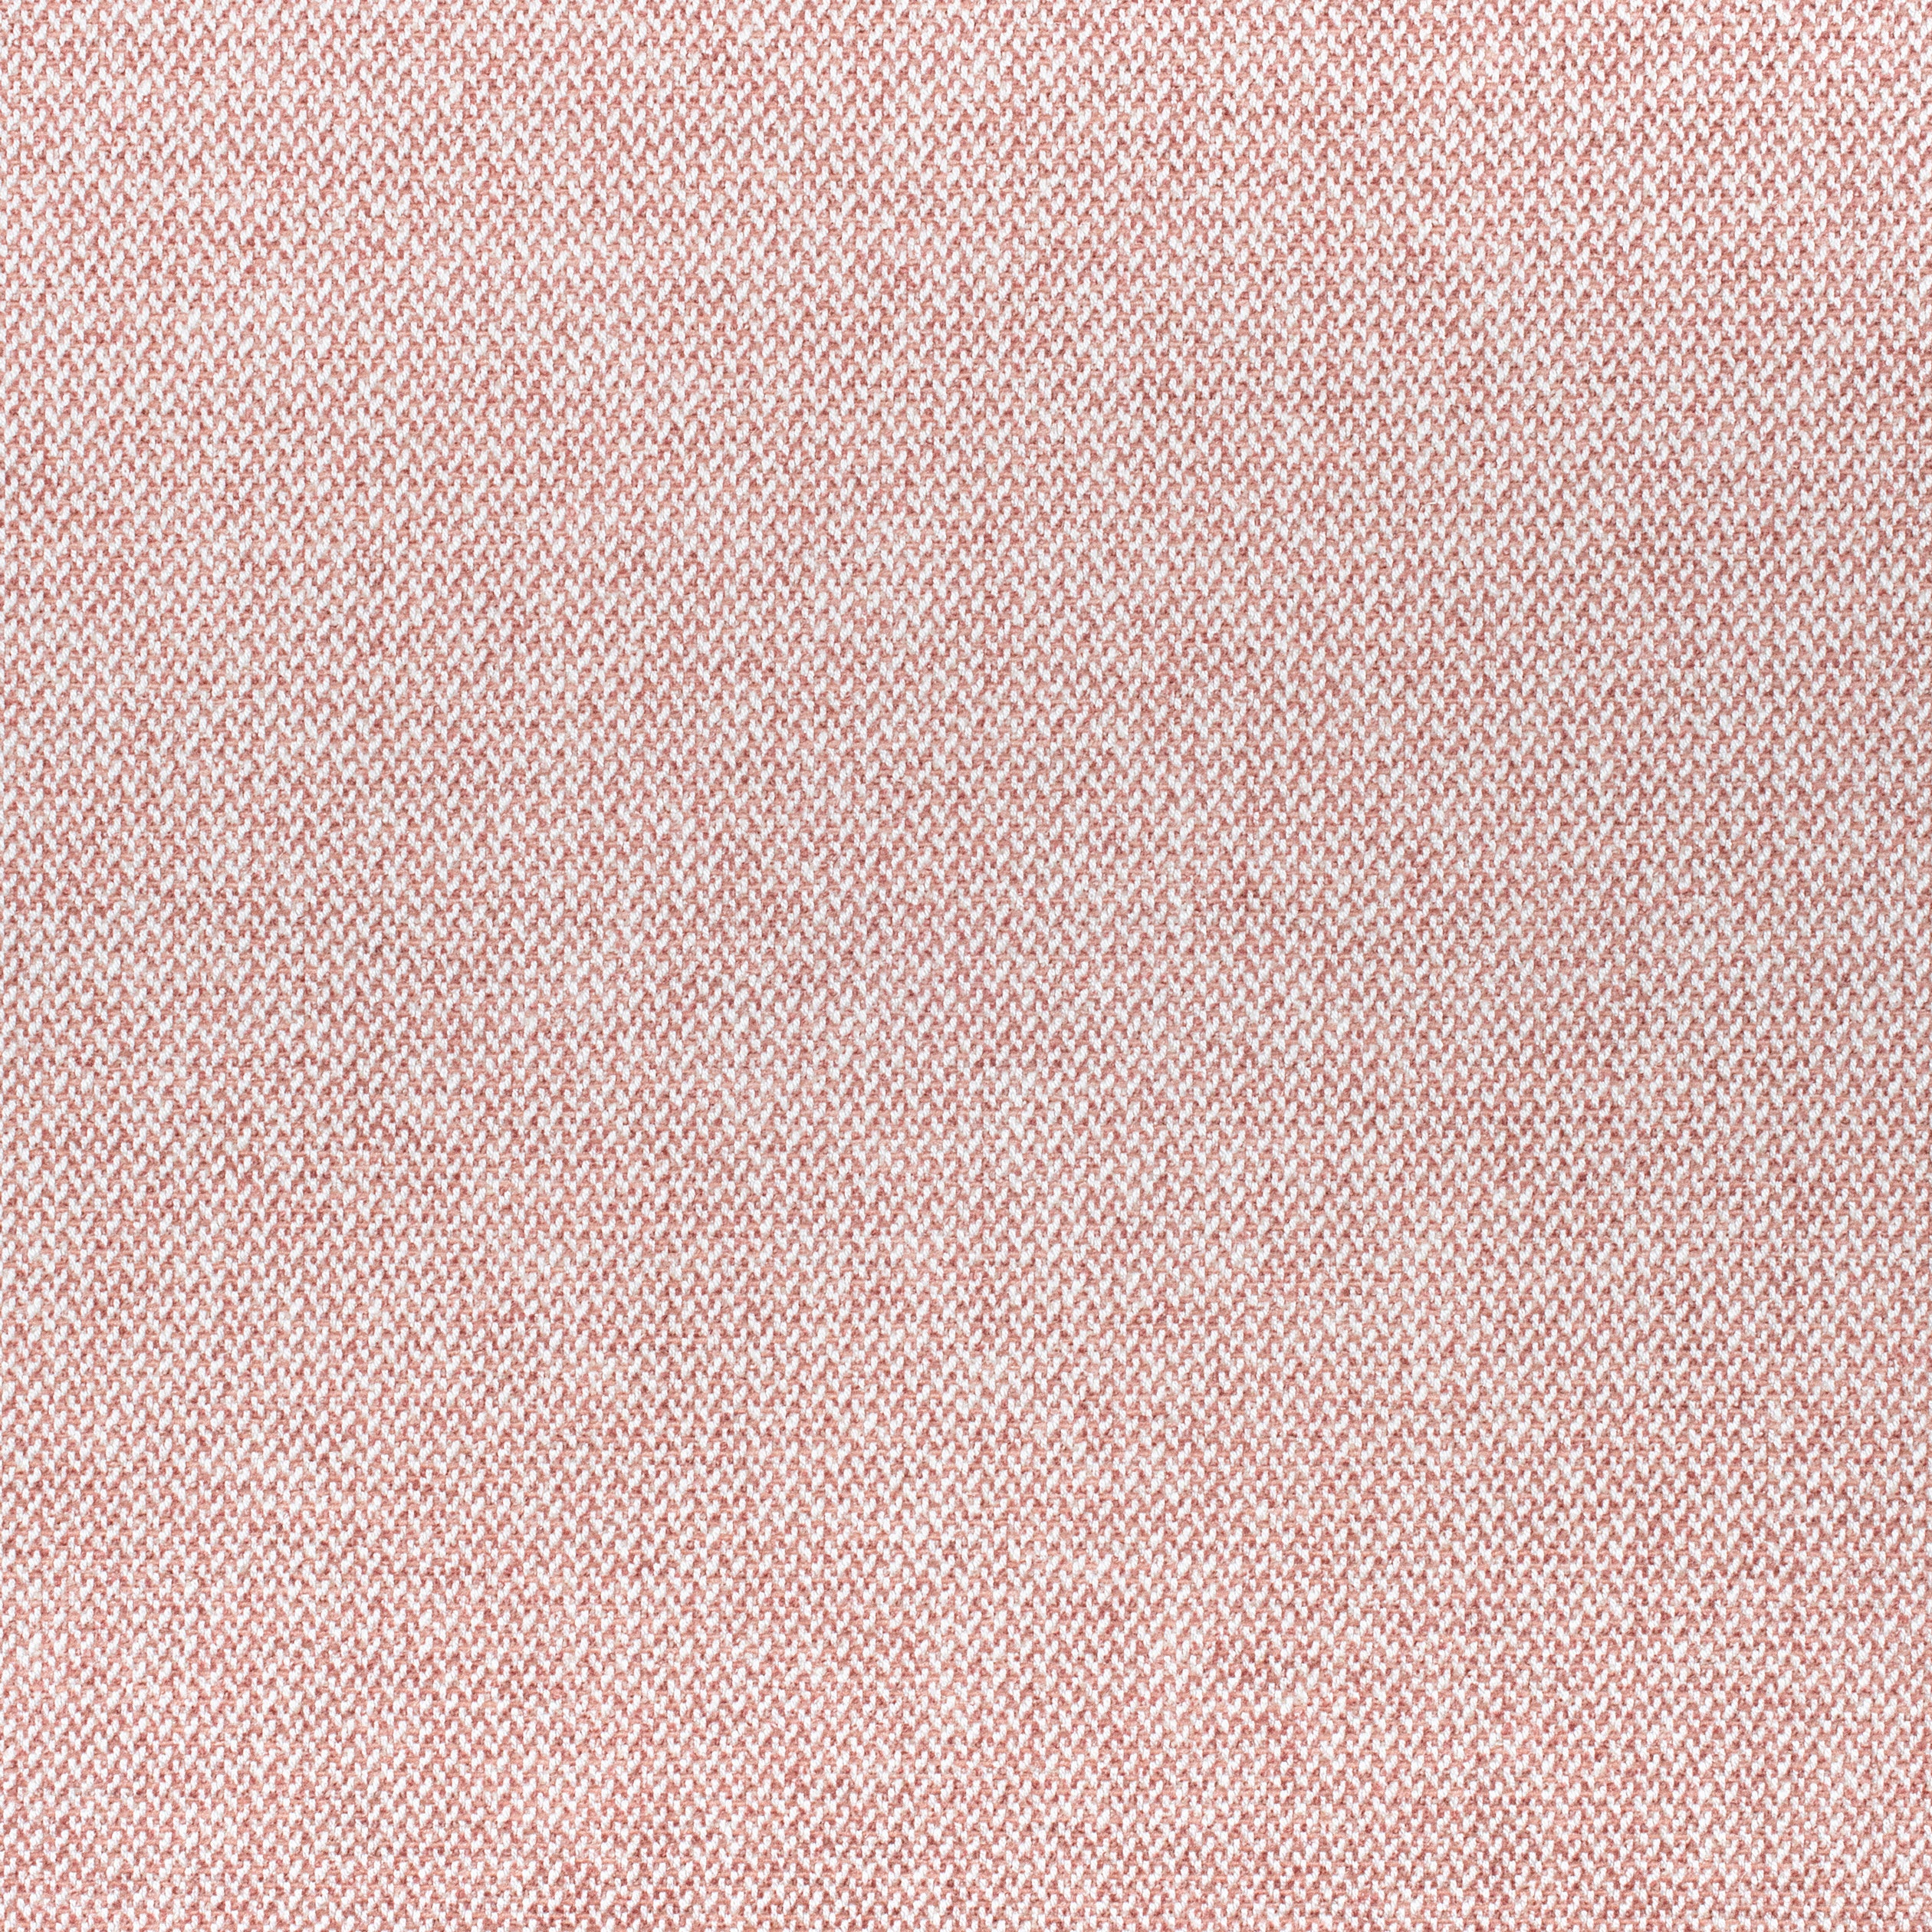 Picco fabric in blush color - pattern number W80705 - by Thibaut in the Woven Resource 11: Rialto collection